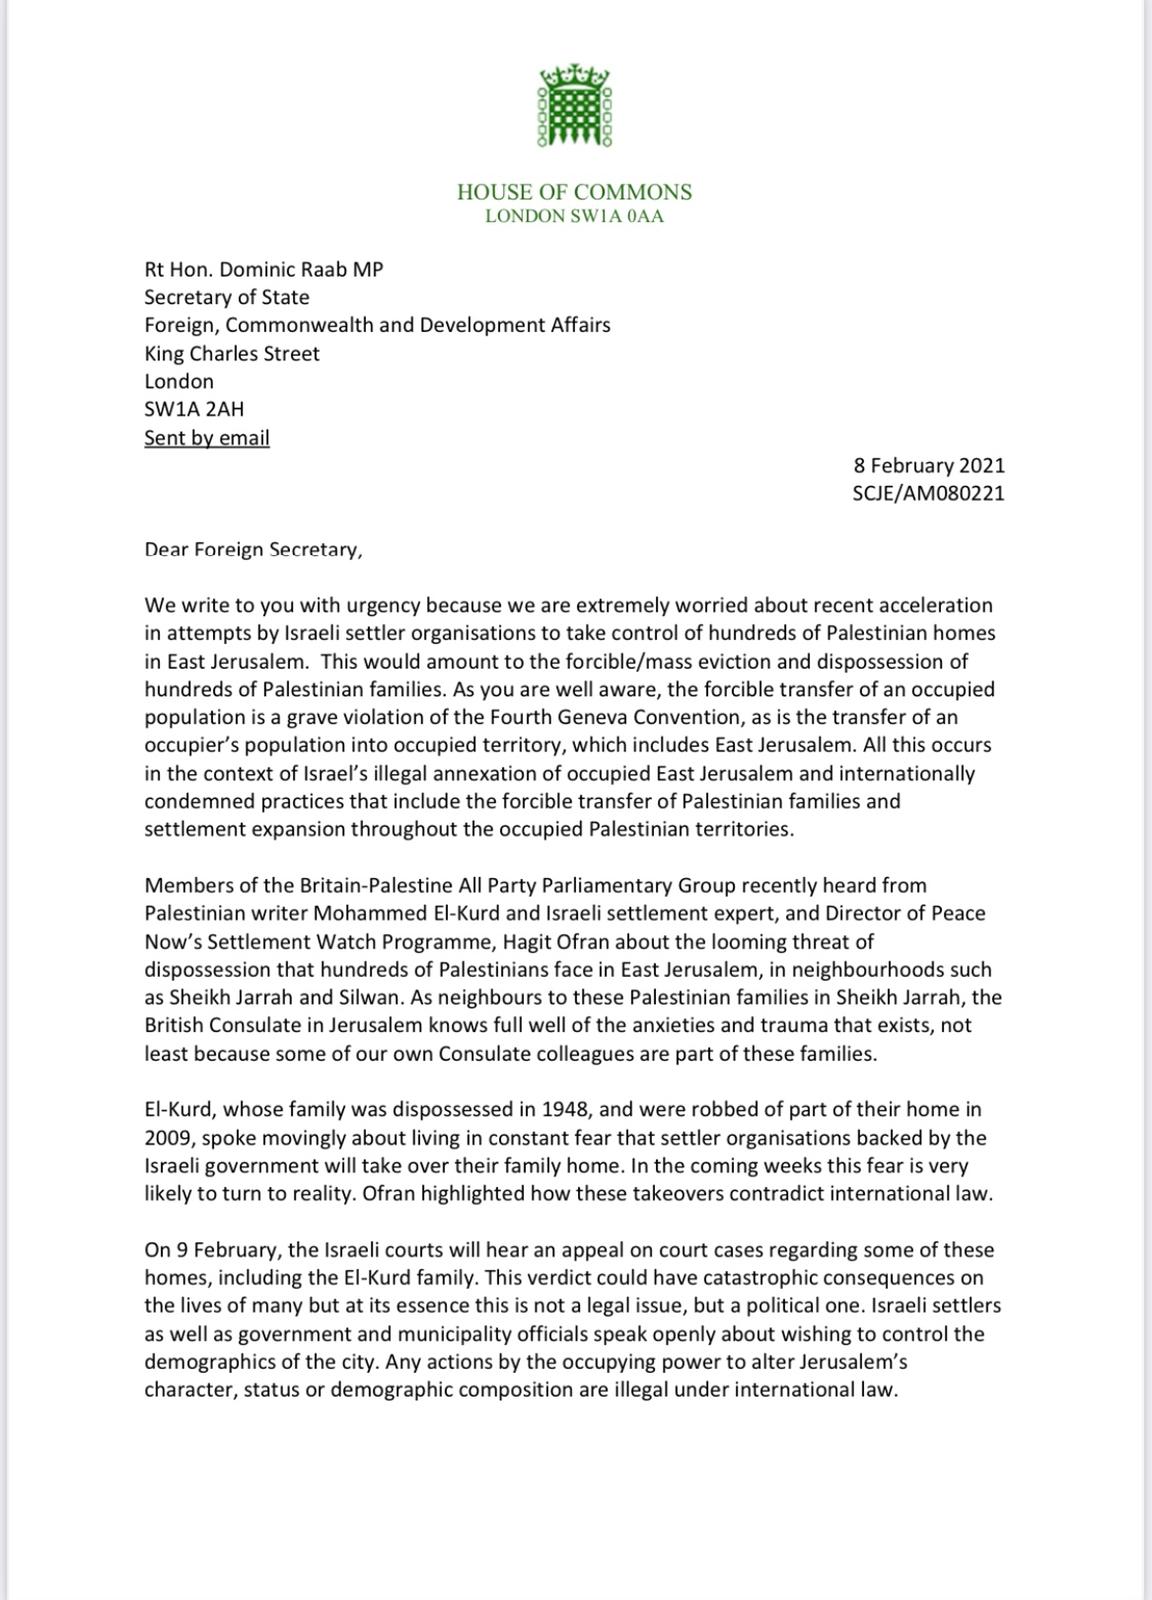 Over 80 UK parliamentarians call on Israel to stop the dispossession of Palestinian families in East Jerusalem, or face diplomatic consequences